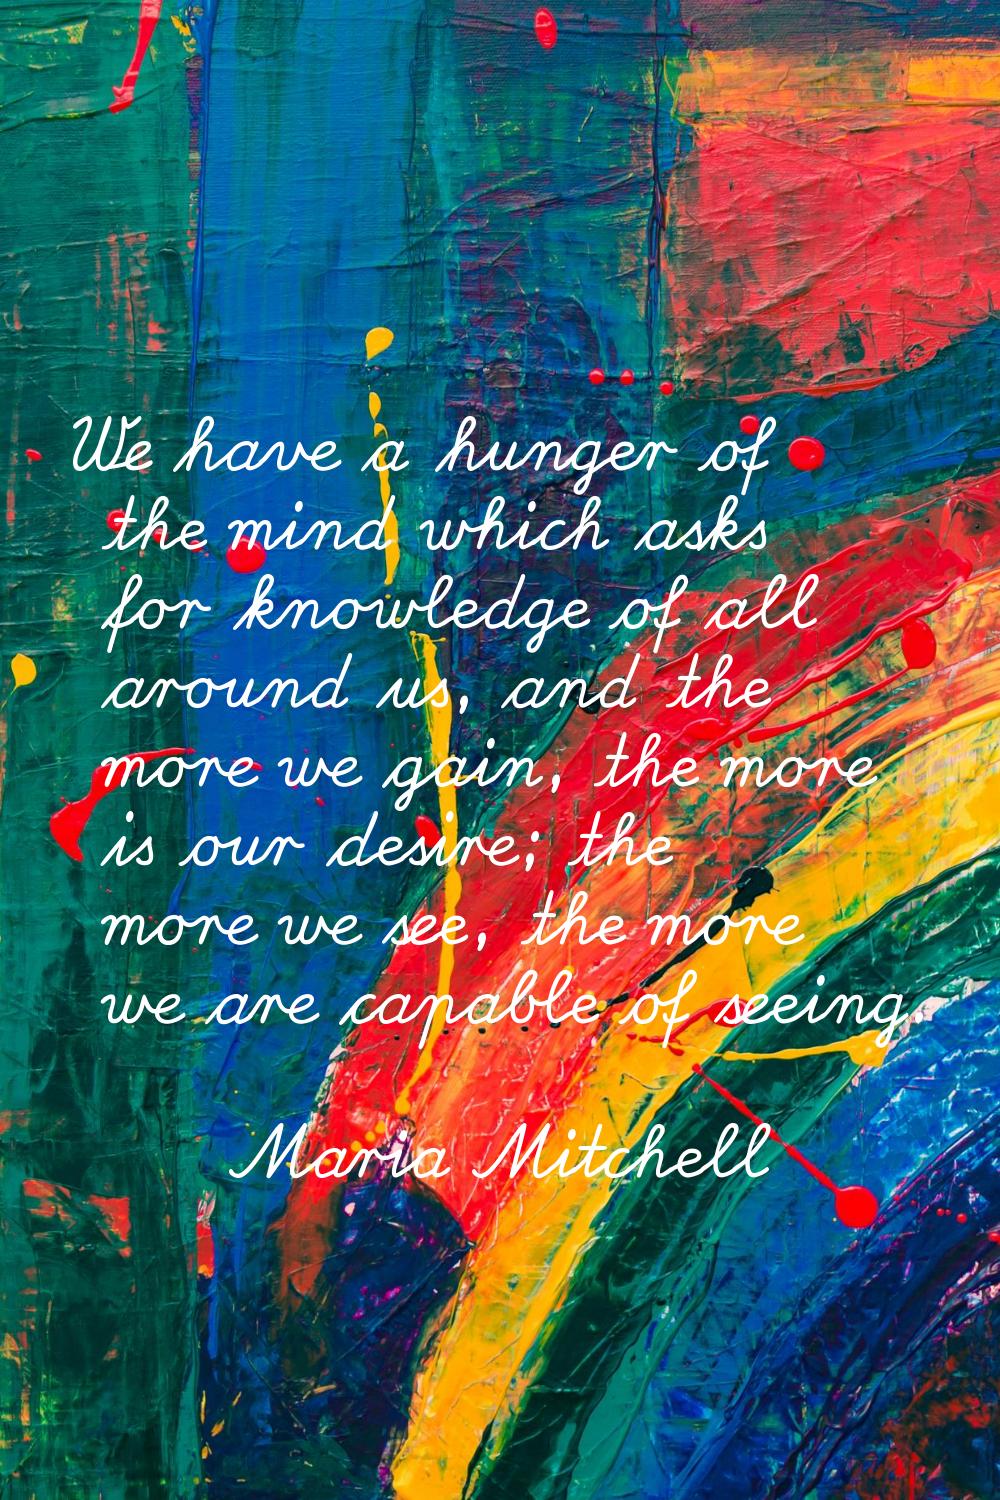 We have a hunger of the mind which asks for knowledge of all around us, and the more we gain, the m